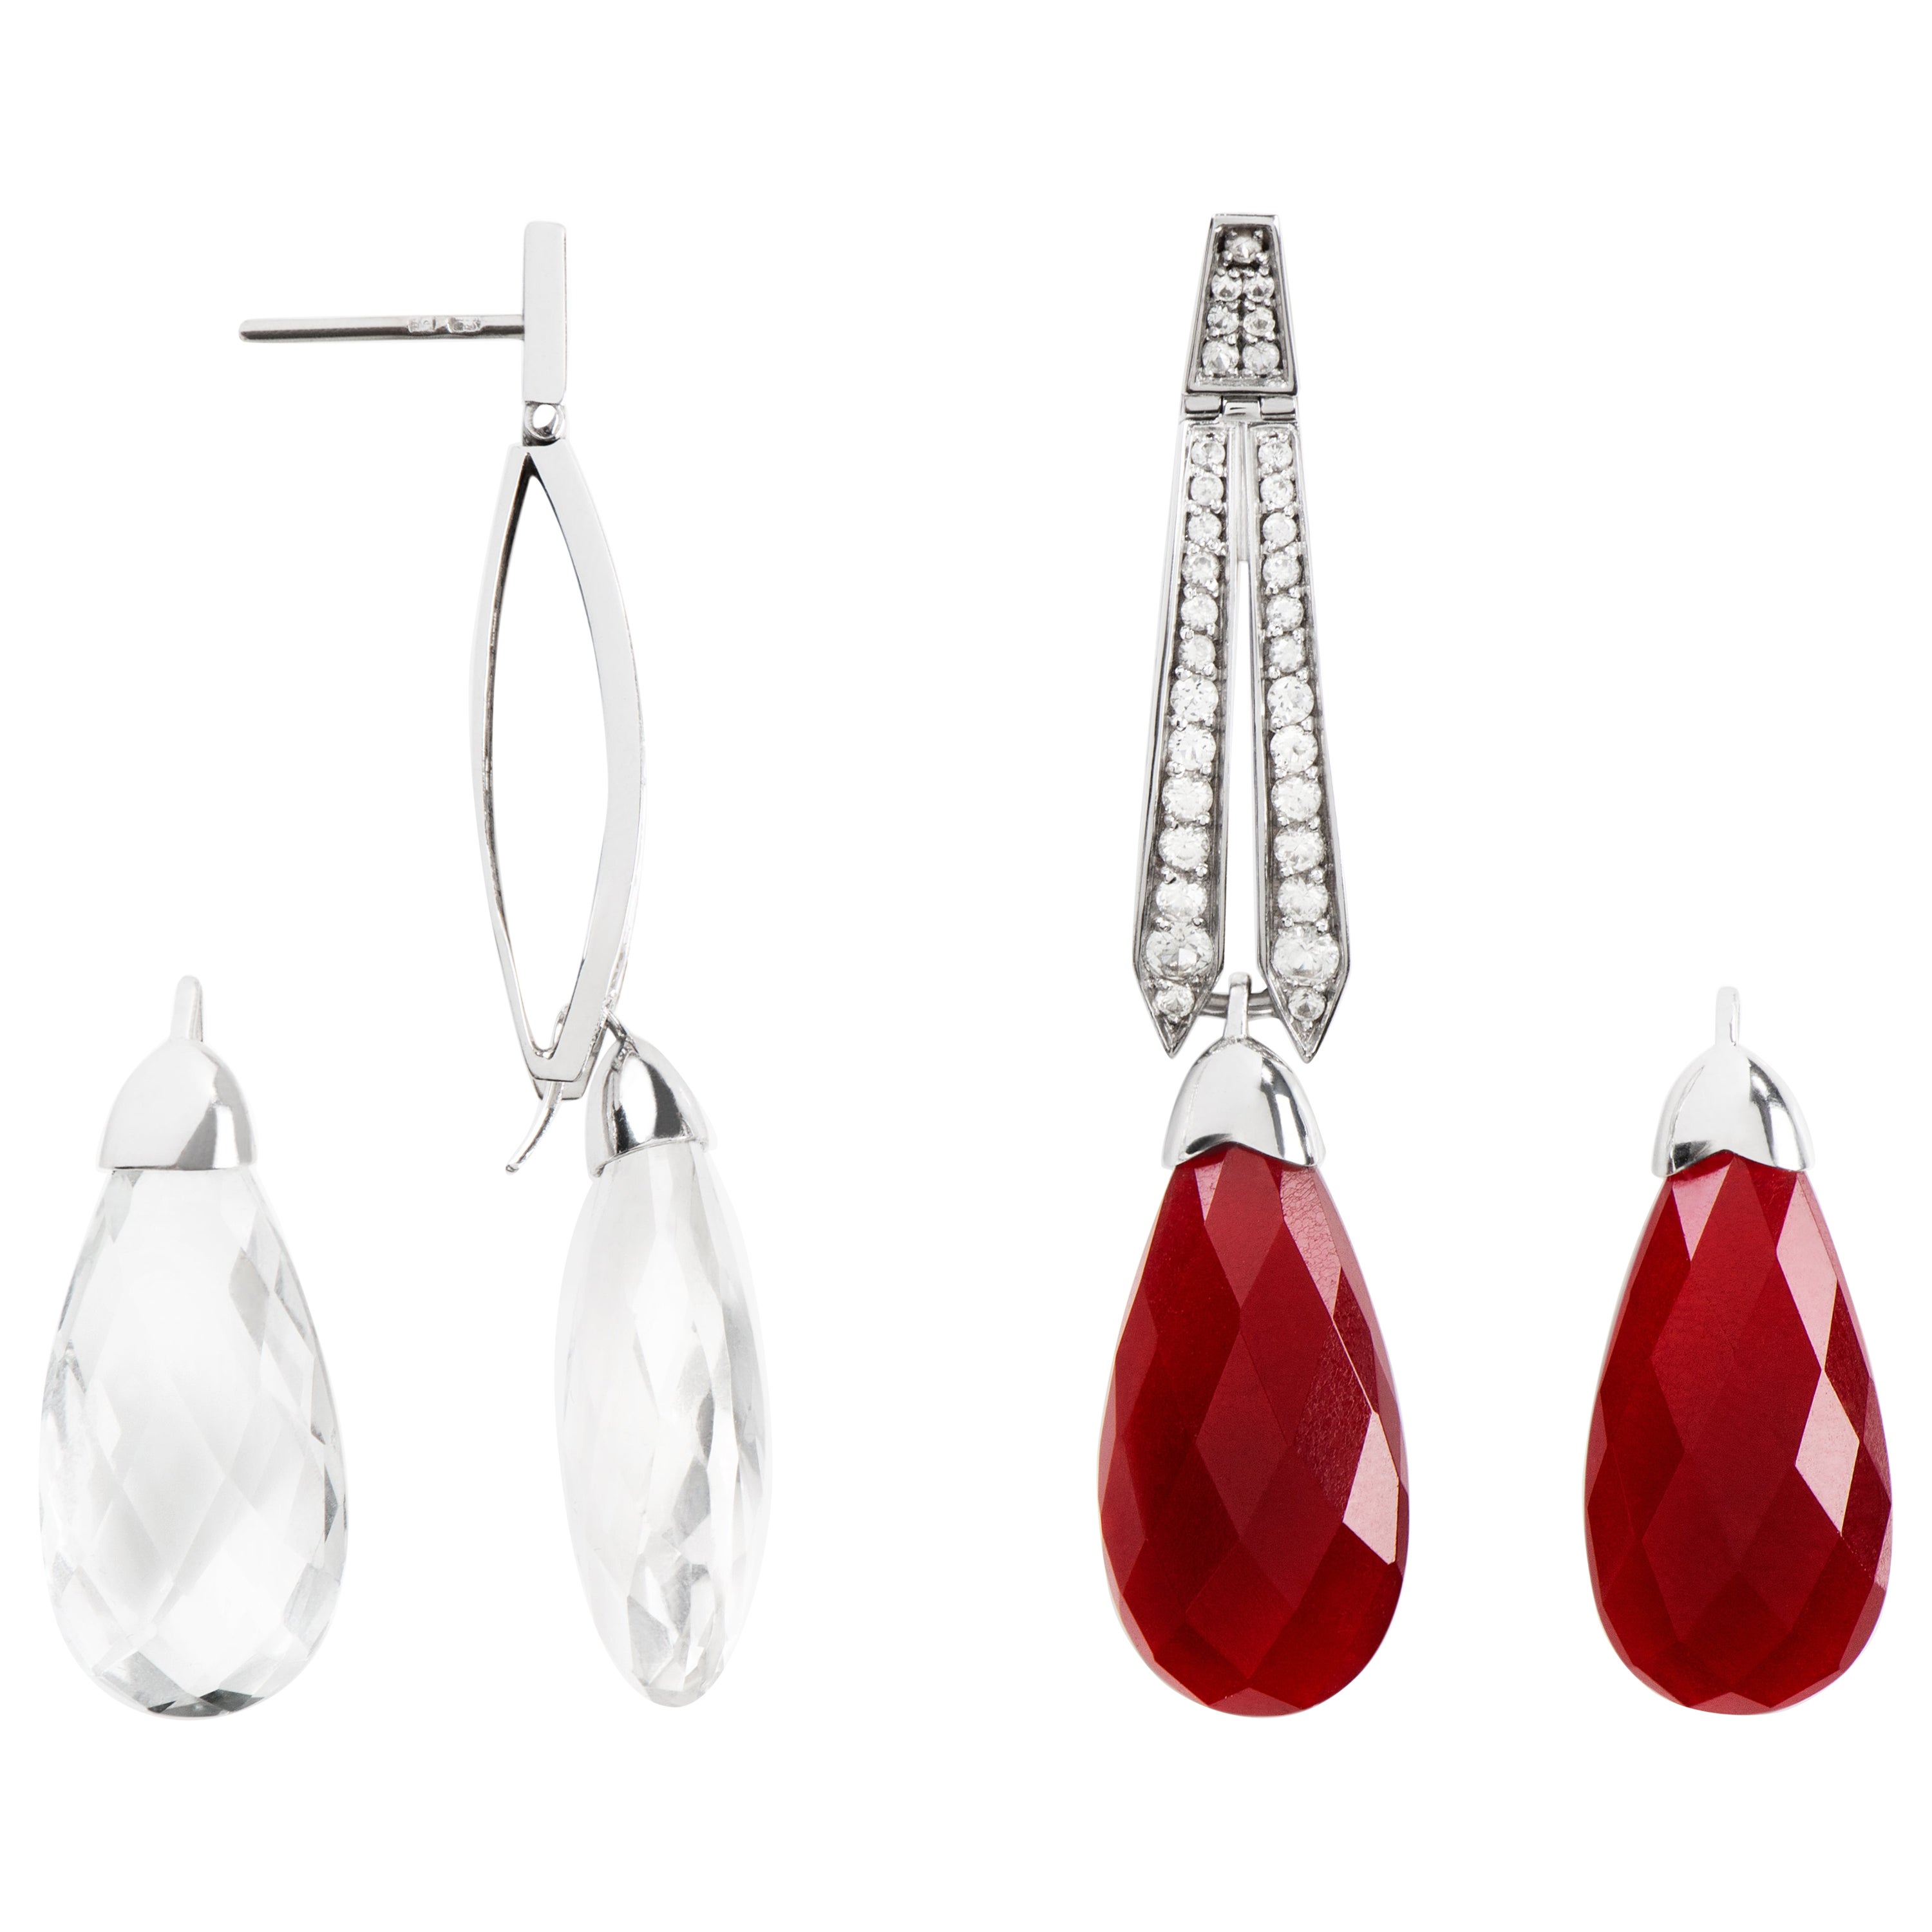 Eliania Rosetti Earrings in 18k Gold 36.4 Cts of White Topaz  25.7 Cts Red Jade For Sale